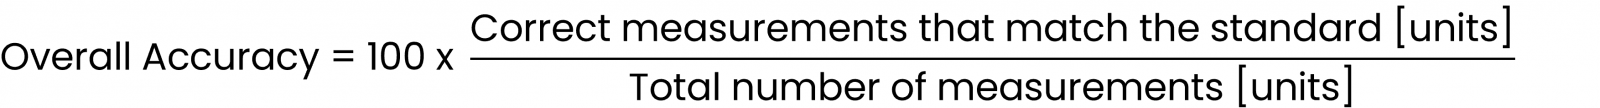 How to calculate Overall Accuracy of a measurement system. Use this simple formula.